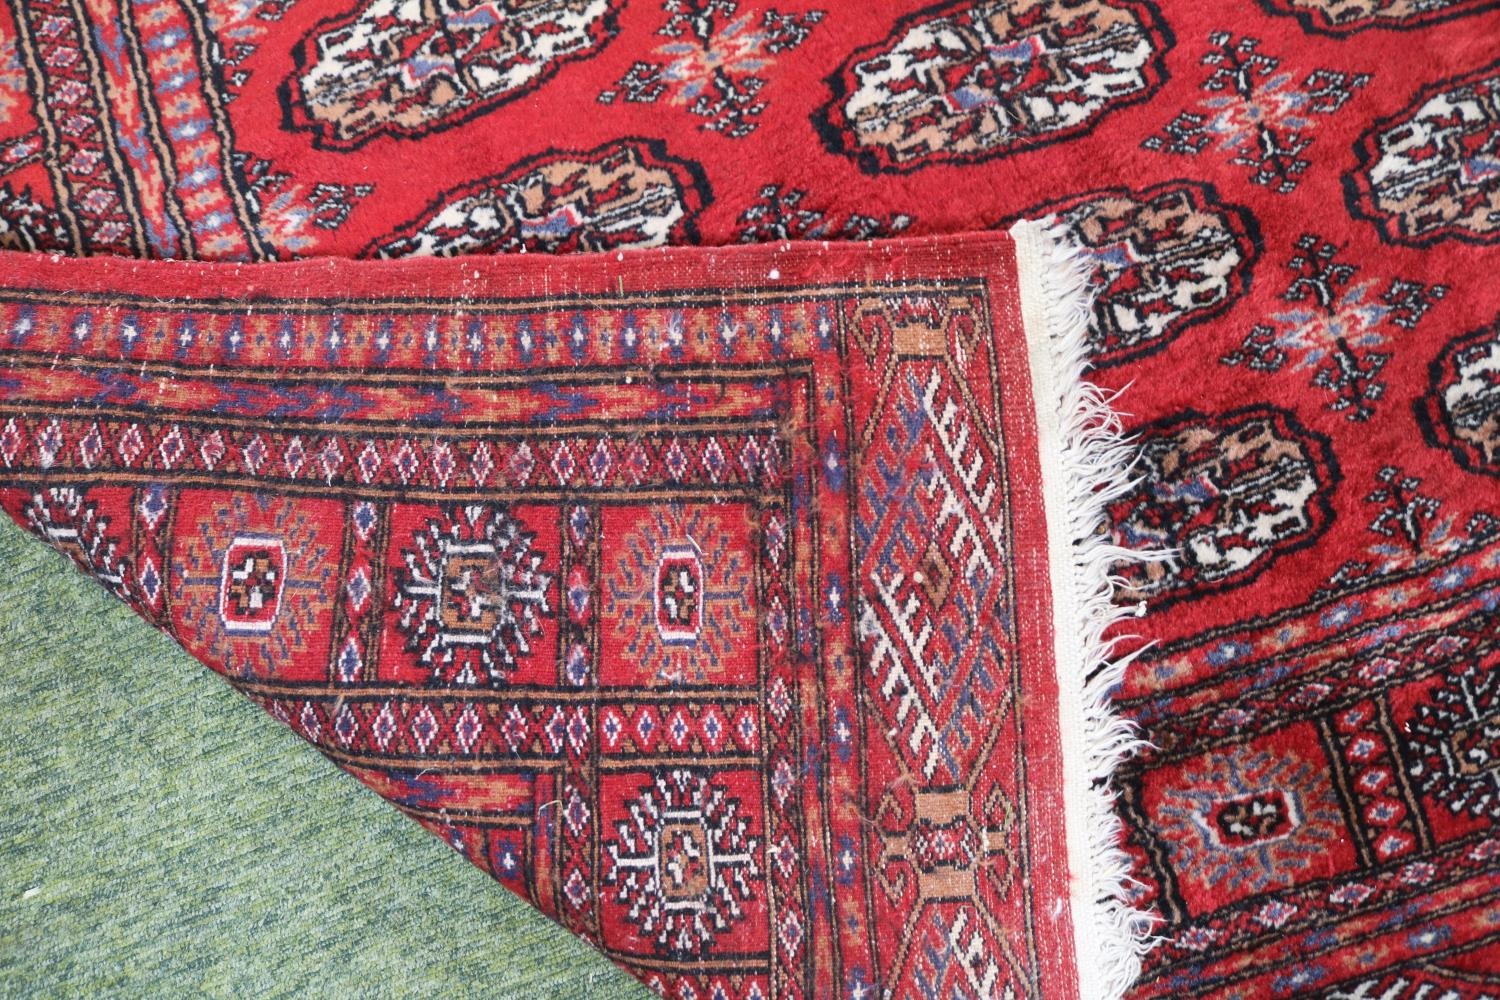 Large Red Bokhara Rug with Tassel ends 197cm in Length - Image 2 of 2